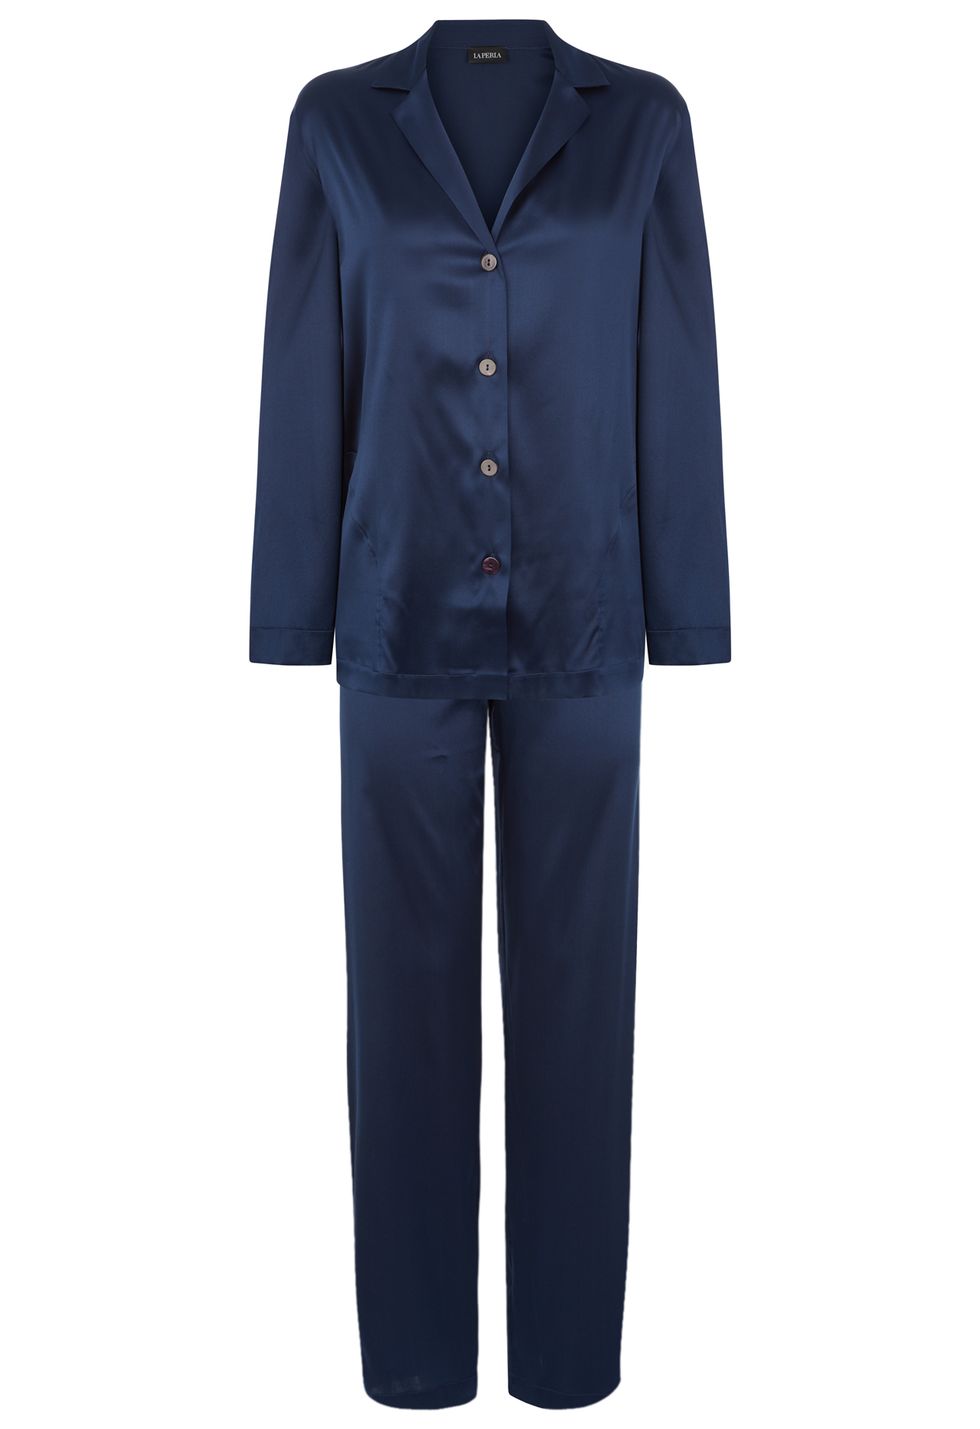 Clothing, Blue, Sleeve, Outerwear, Suit, Workwear, Uniform, Pajamas, Trousers, Collar, 